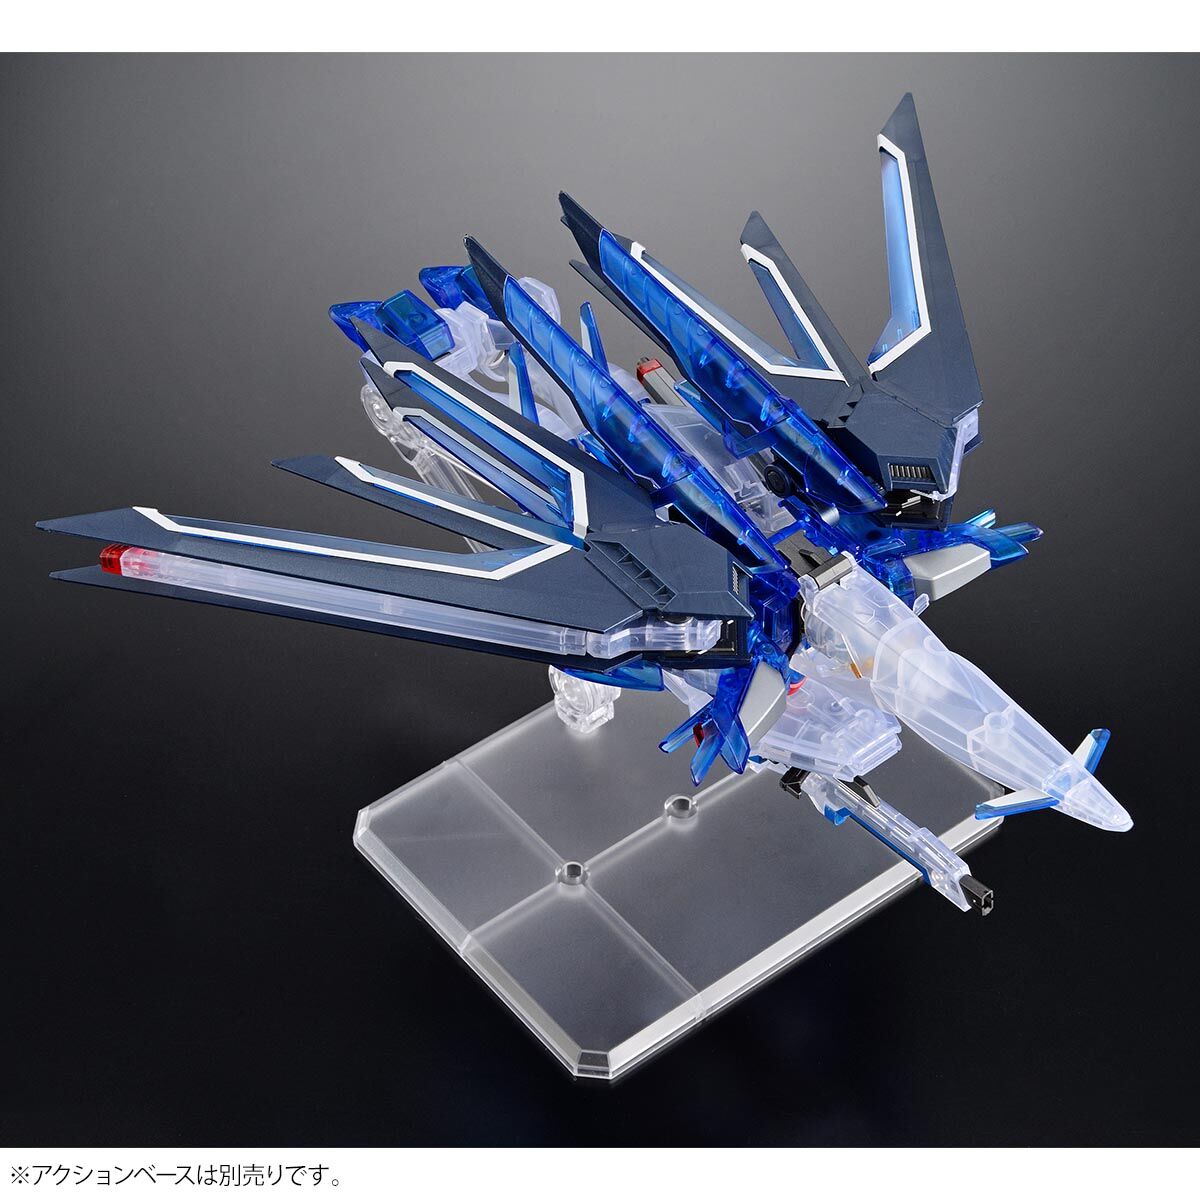 HGCE 1/144 STTS-909 Rising Freedom Gundam(Movie Release Commemoration Package + Clear Color)